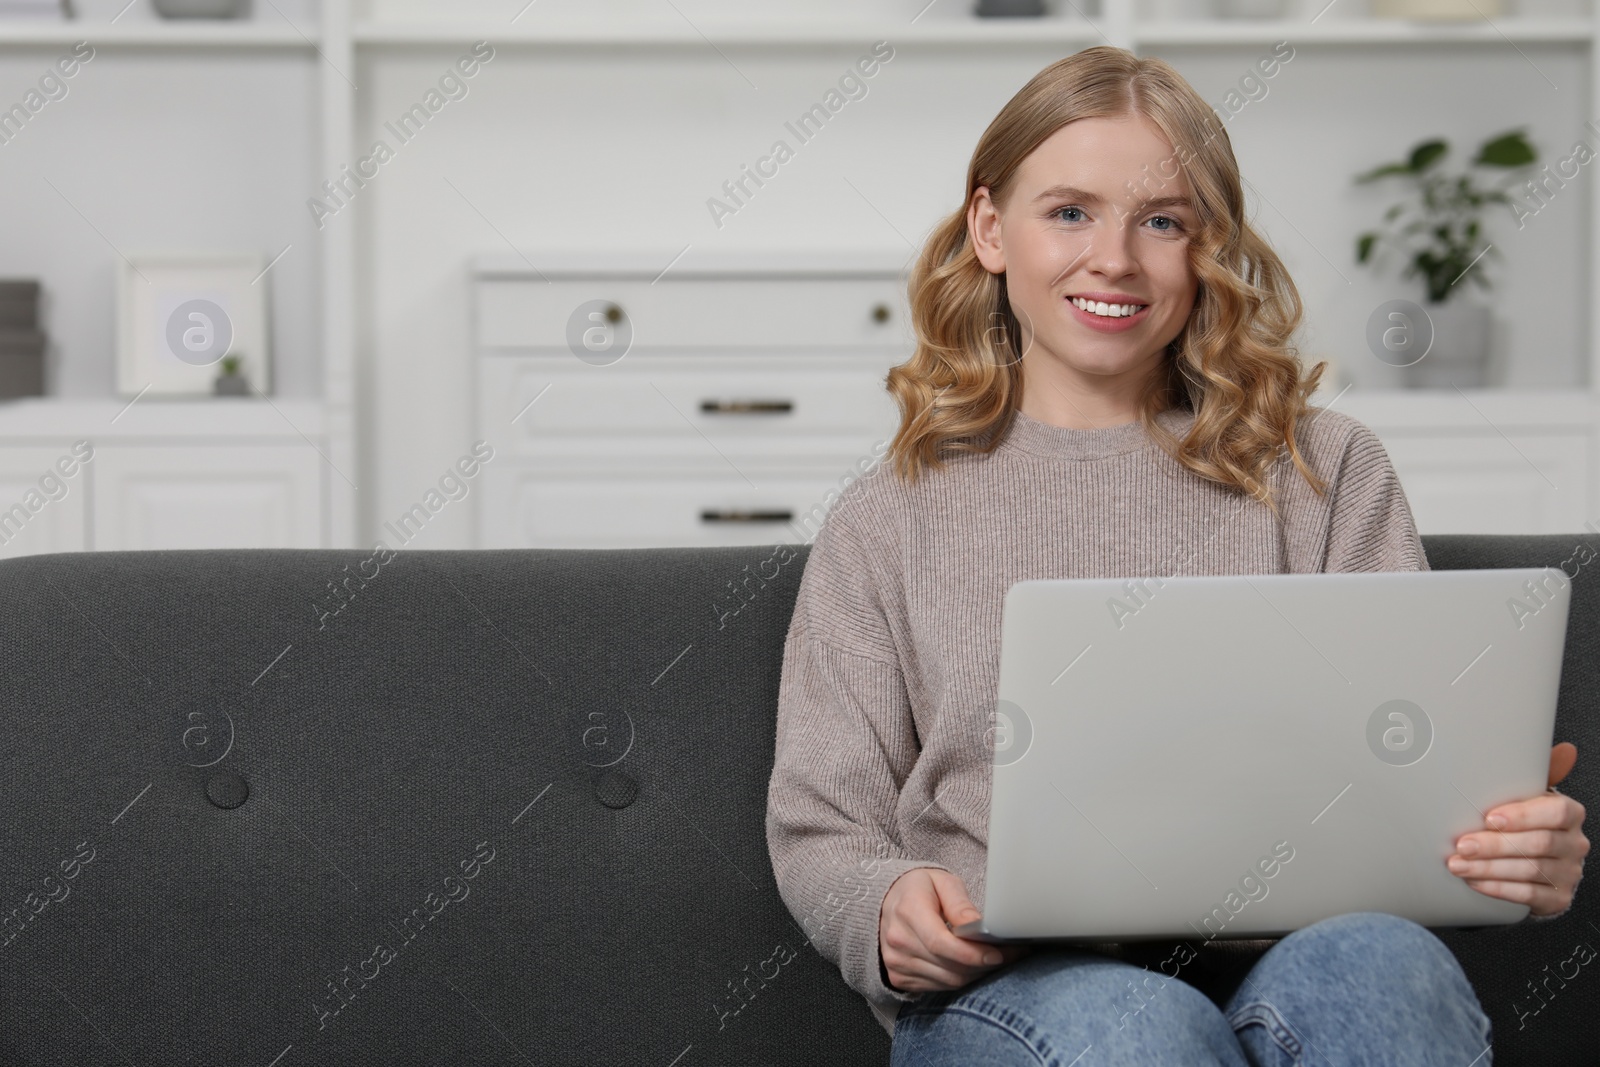 Photo of Beautiful woman with blonde hair using laptop on sofa indoors. Space for text